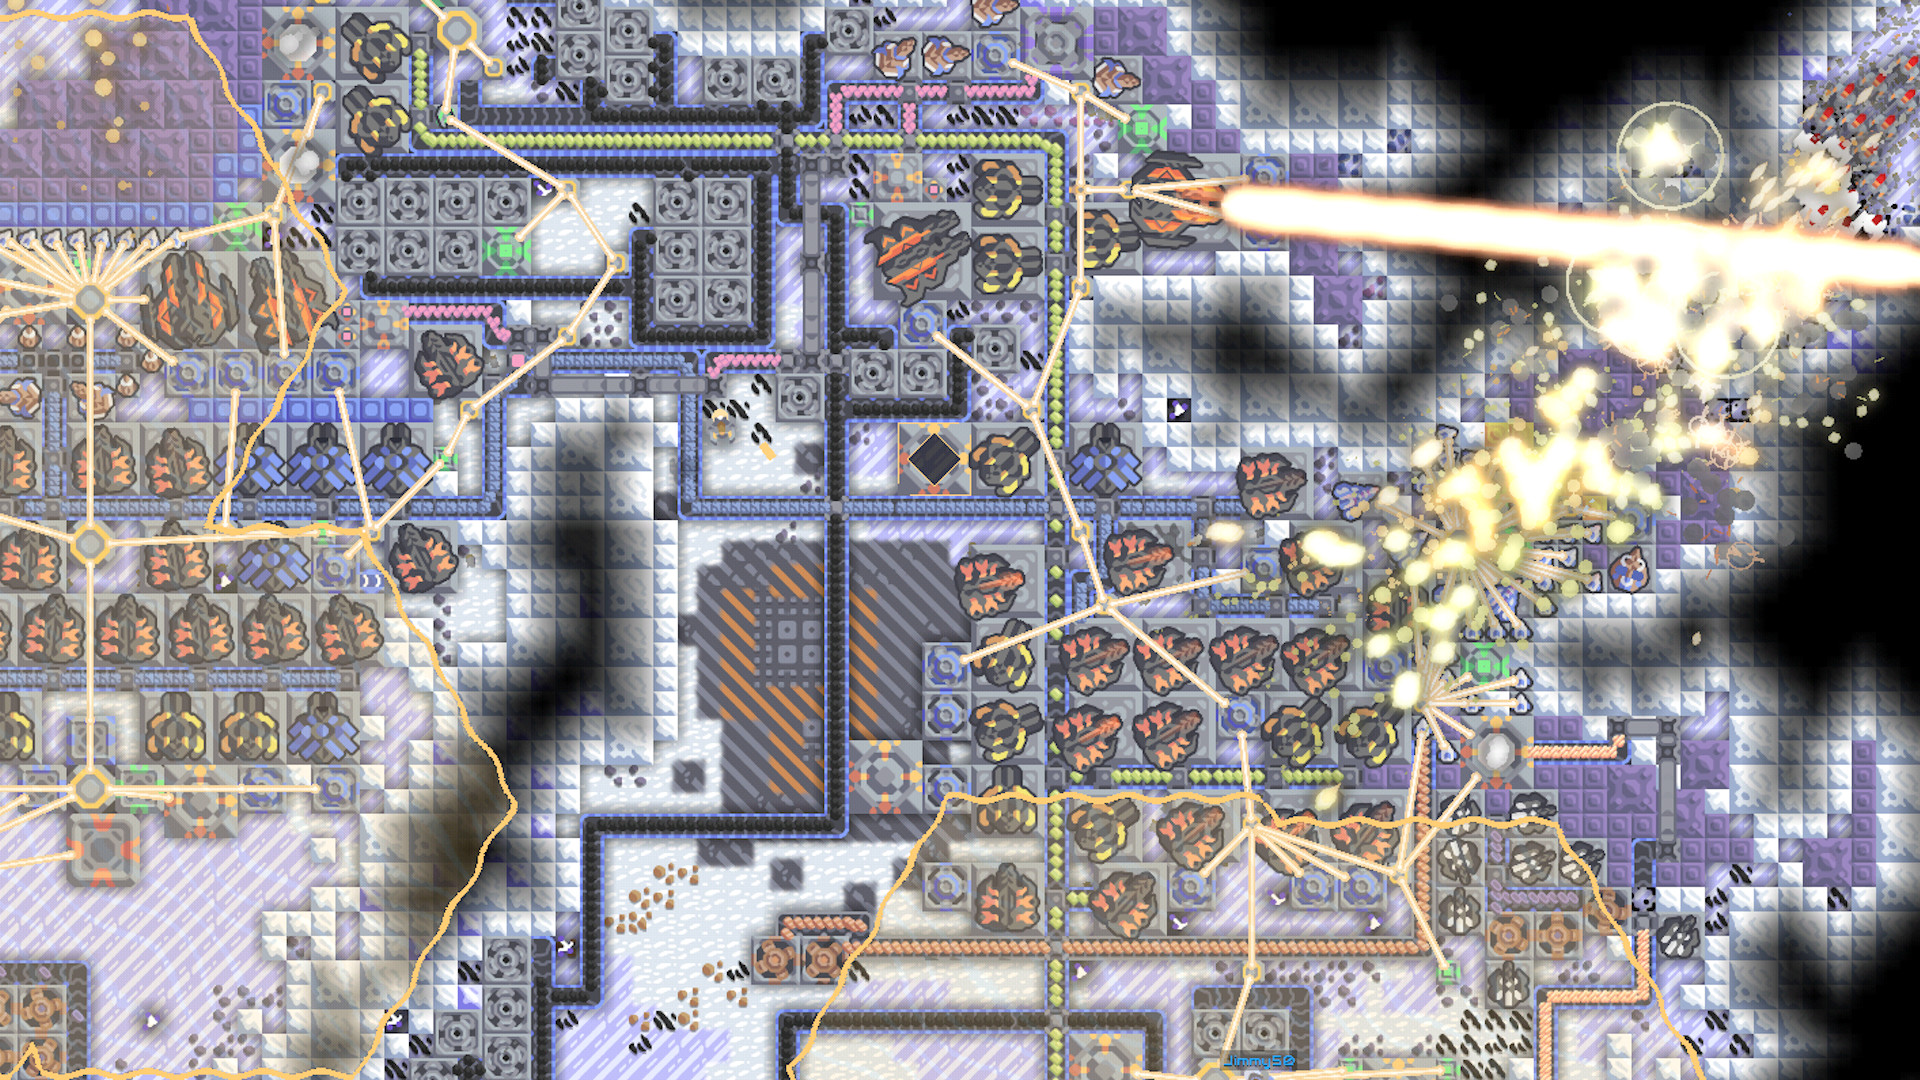 Open-ended tower-defense mining game Mindustry is just awesome